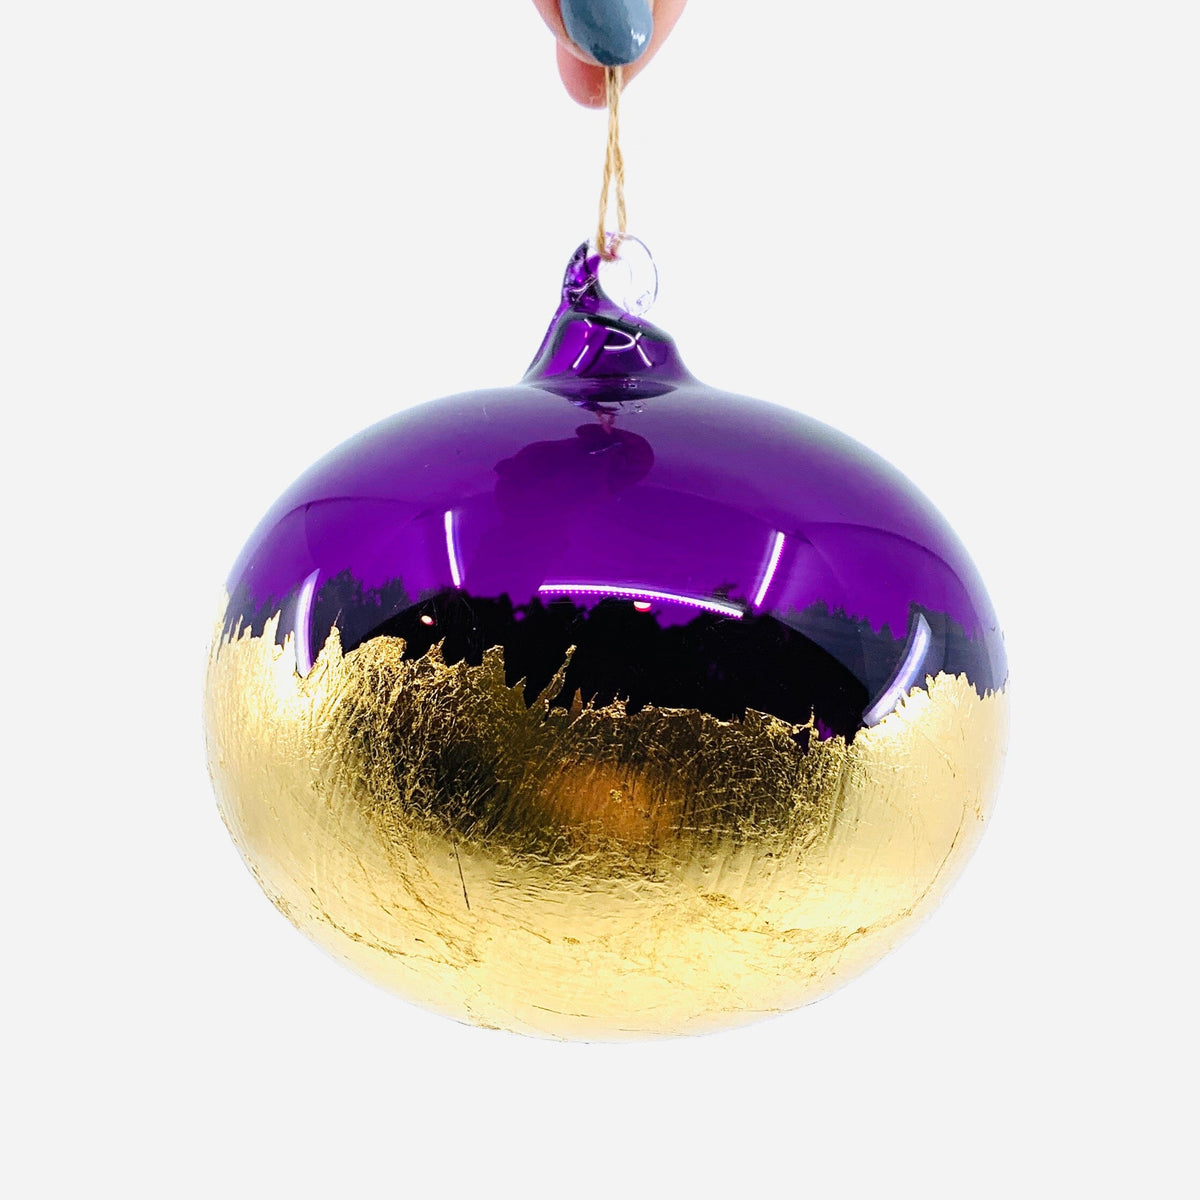 Rainbow Gold Dipped Orb Ornament One Hundred 80 Degrees M 